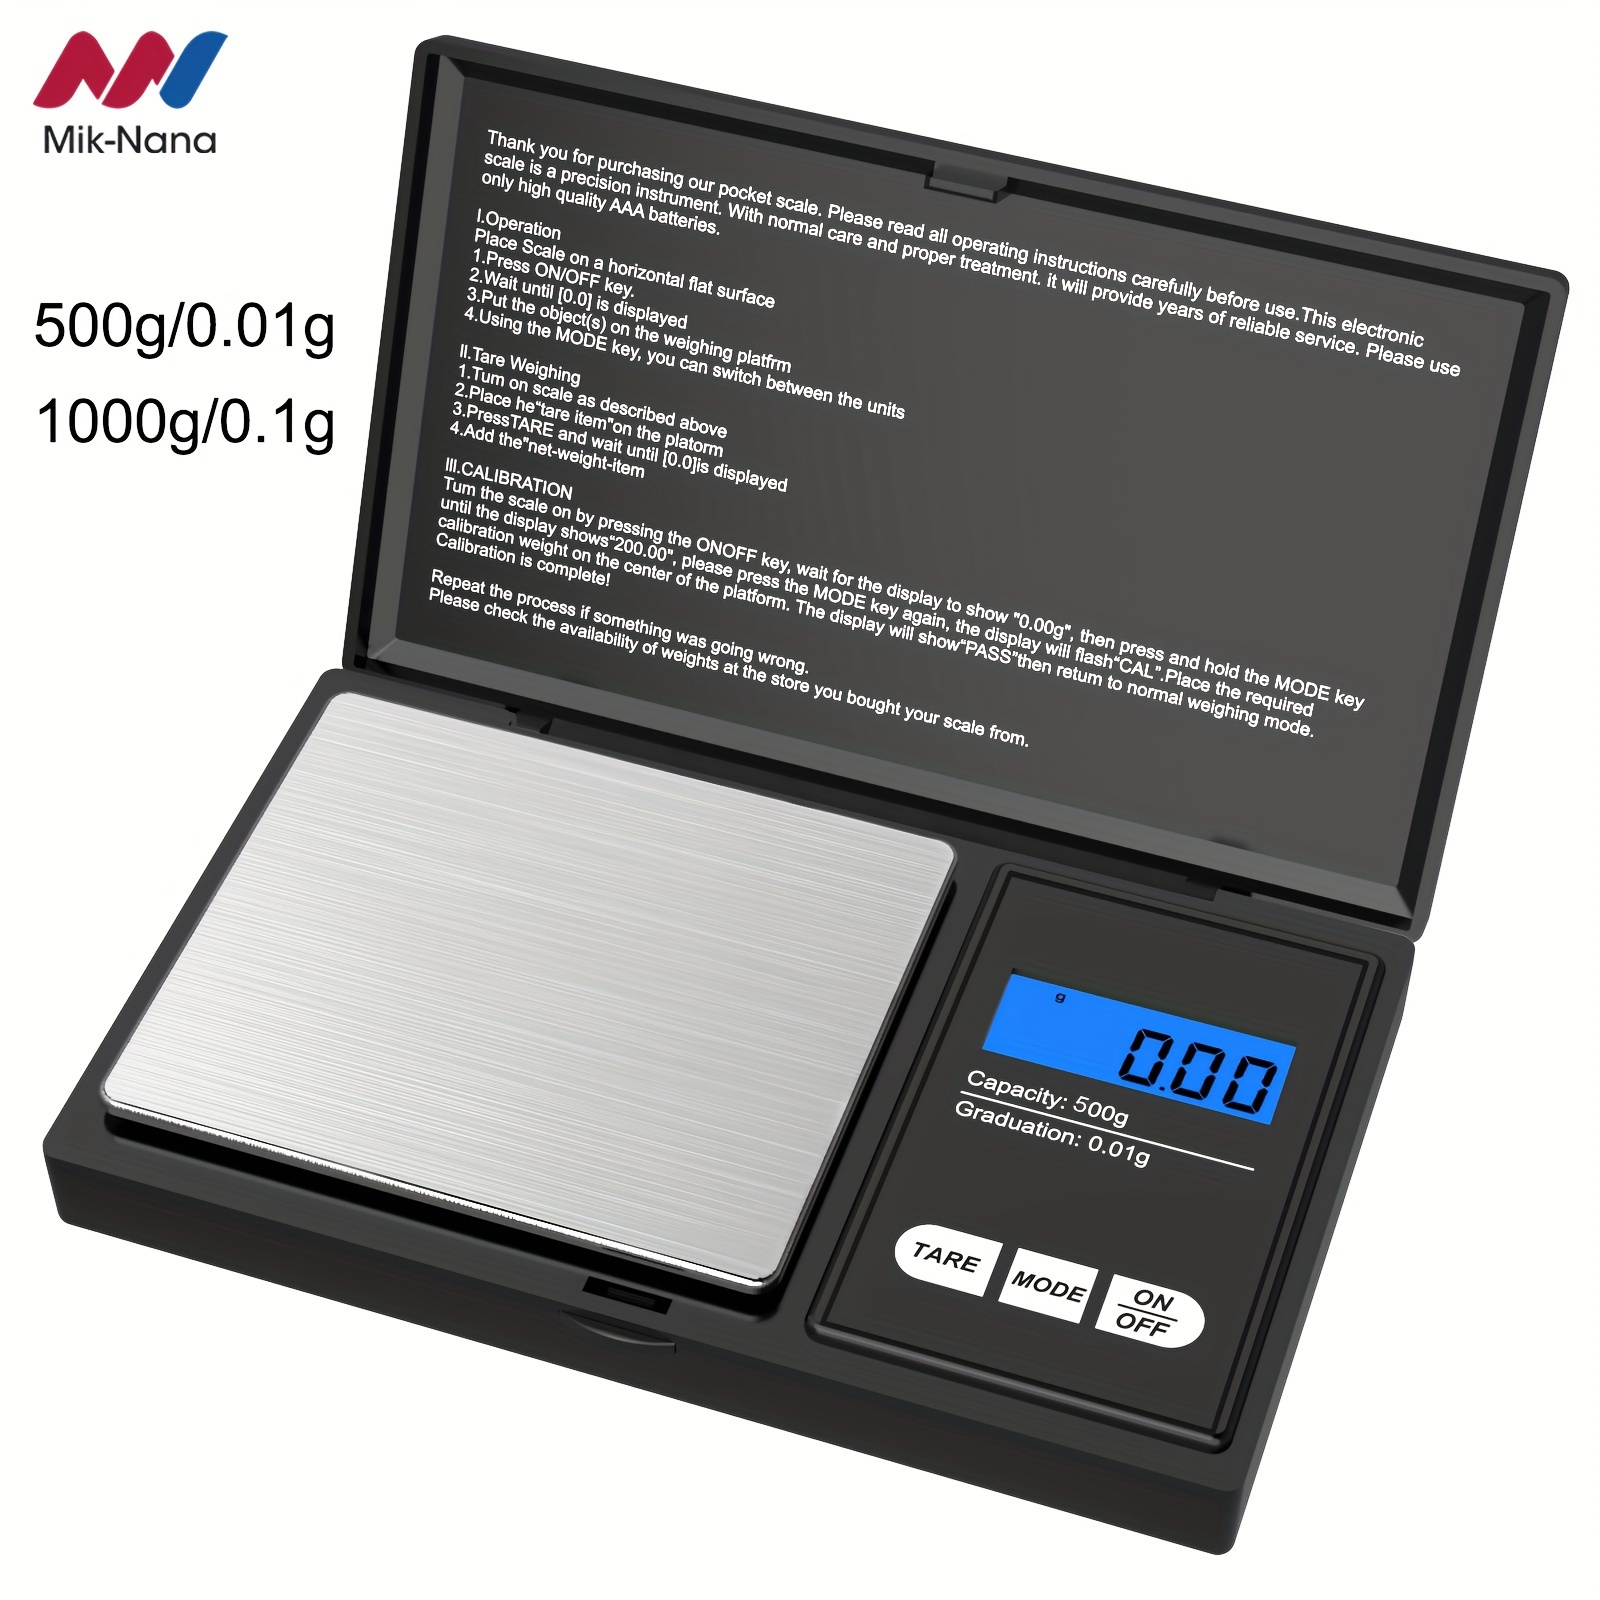 American Weigh Scales S Card Series Compact High Precision Stainless Steel  Digital Pocket Weight Scale 100g X 0.01g - Great For Kitchen : Target